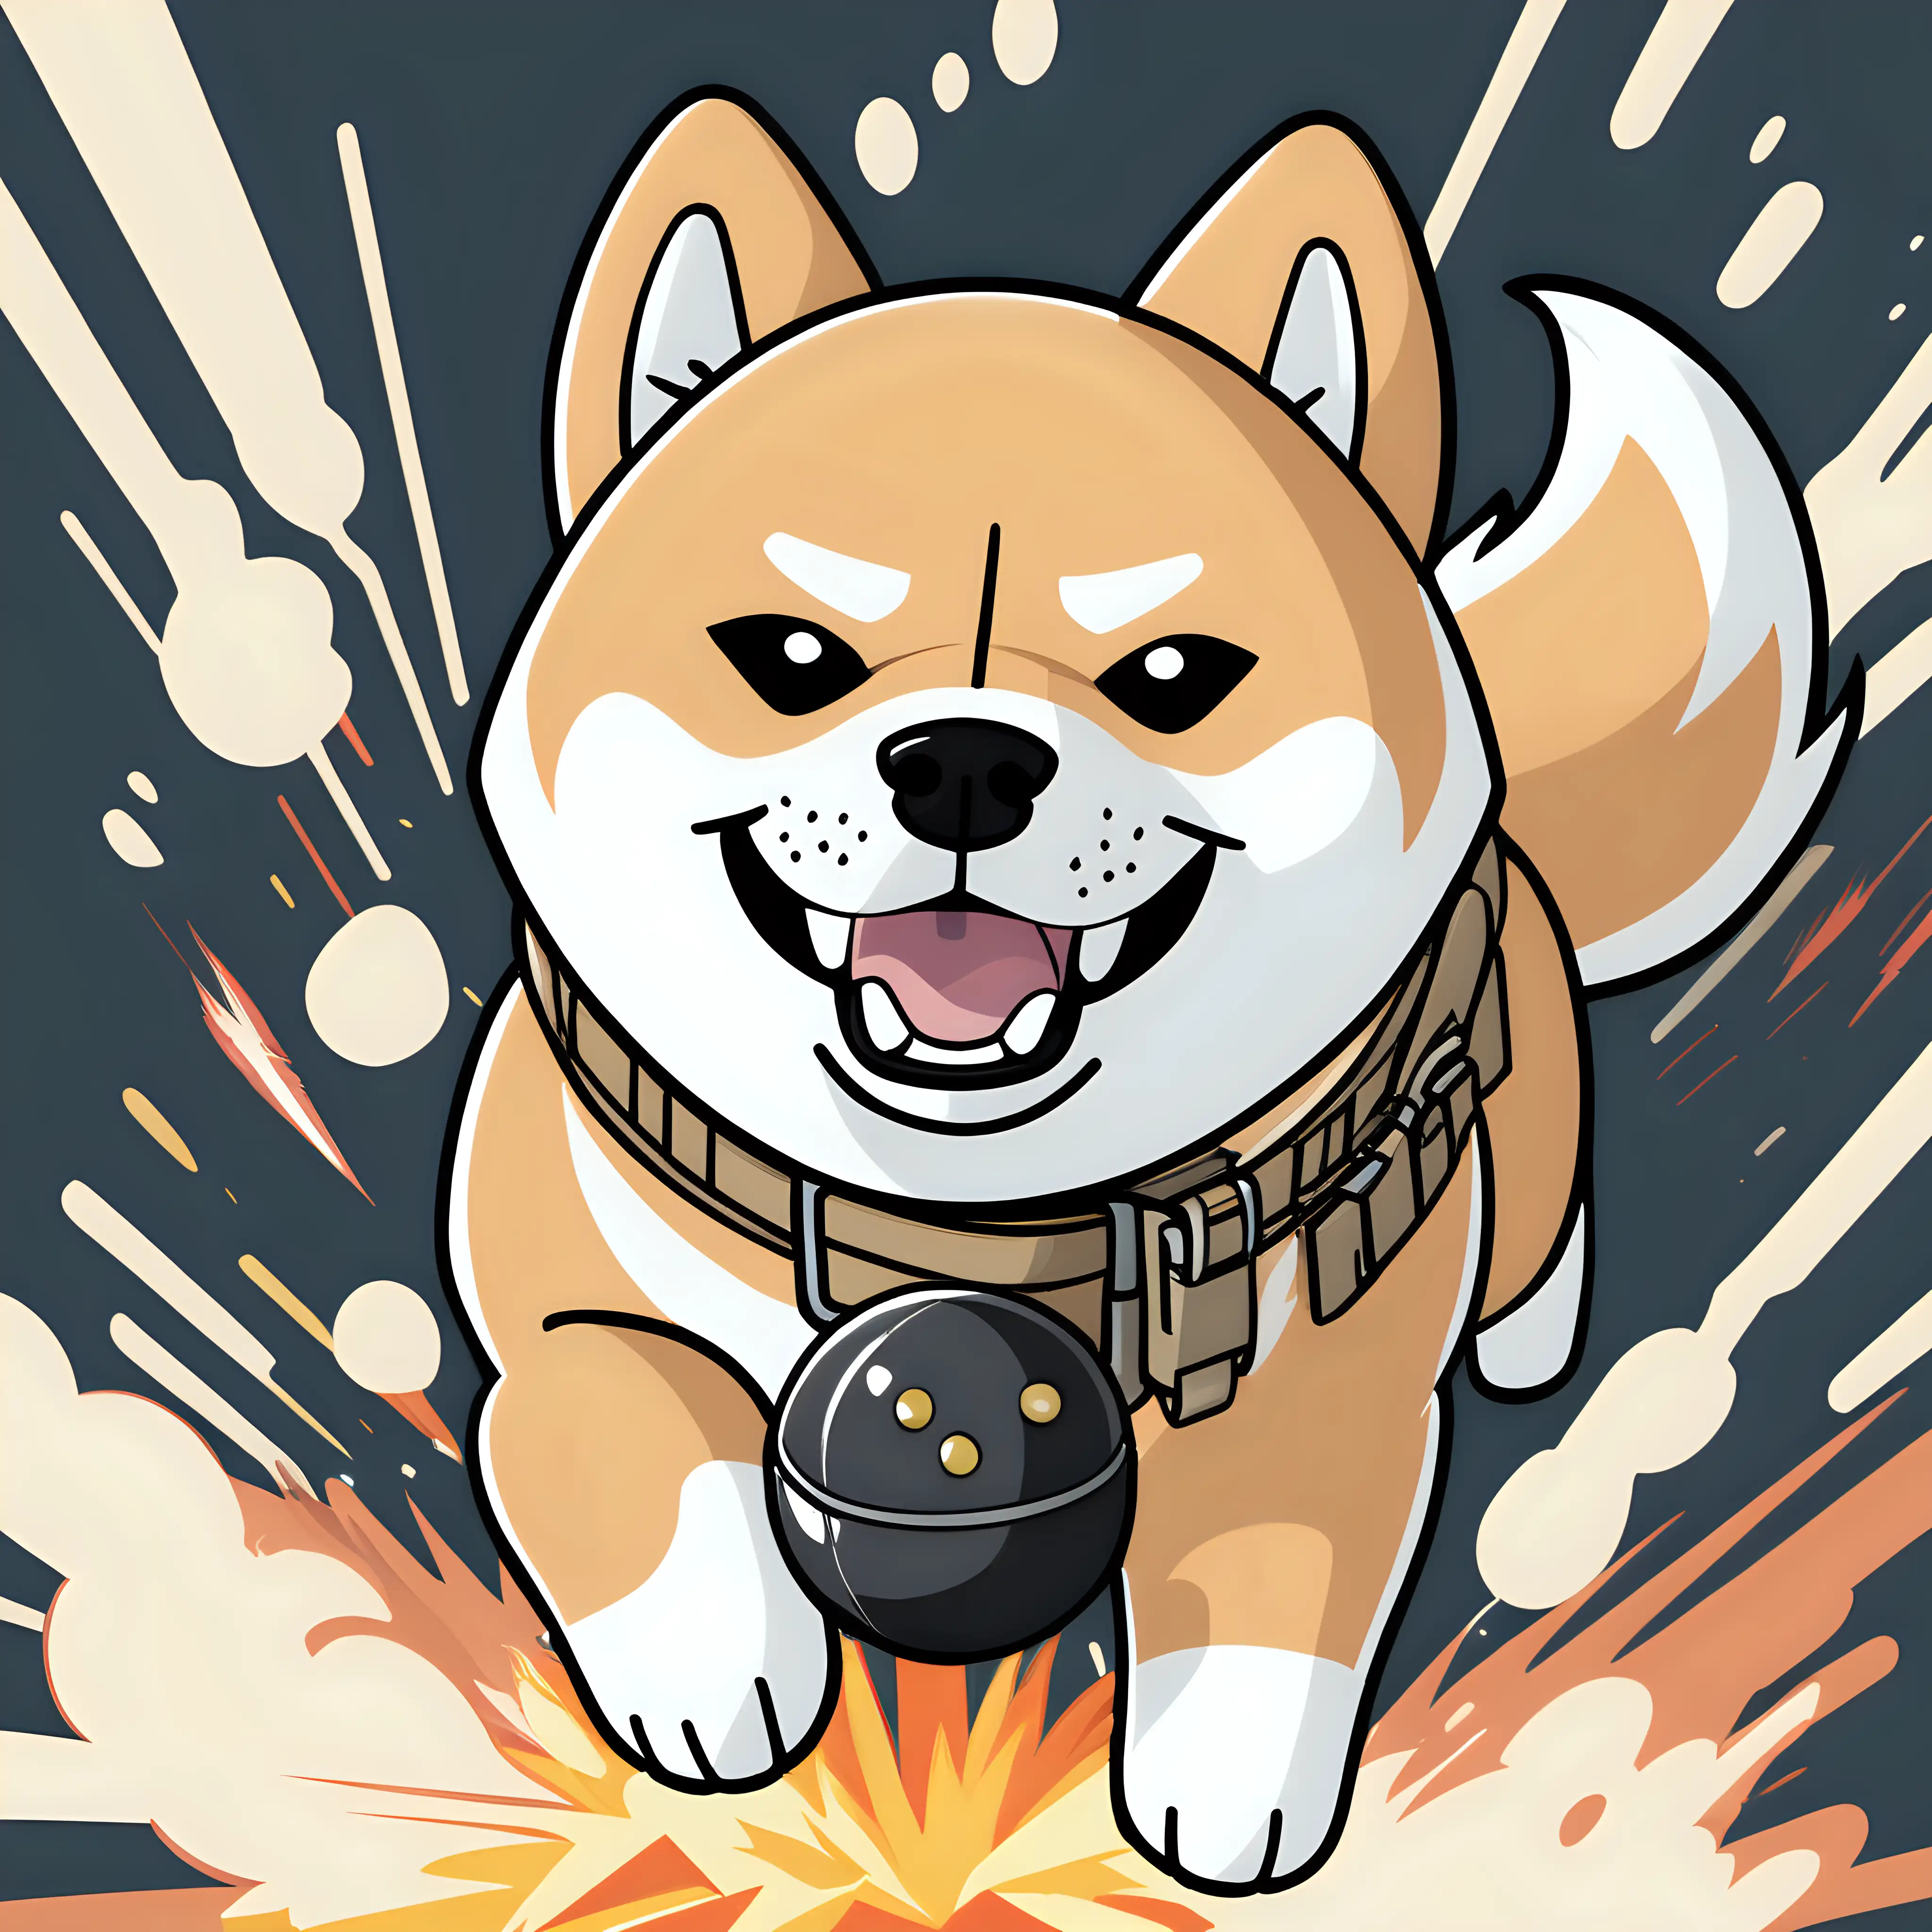 Can you create a Shiba Inu with a bomb and explosion